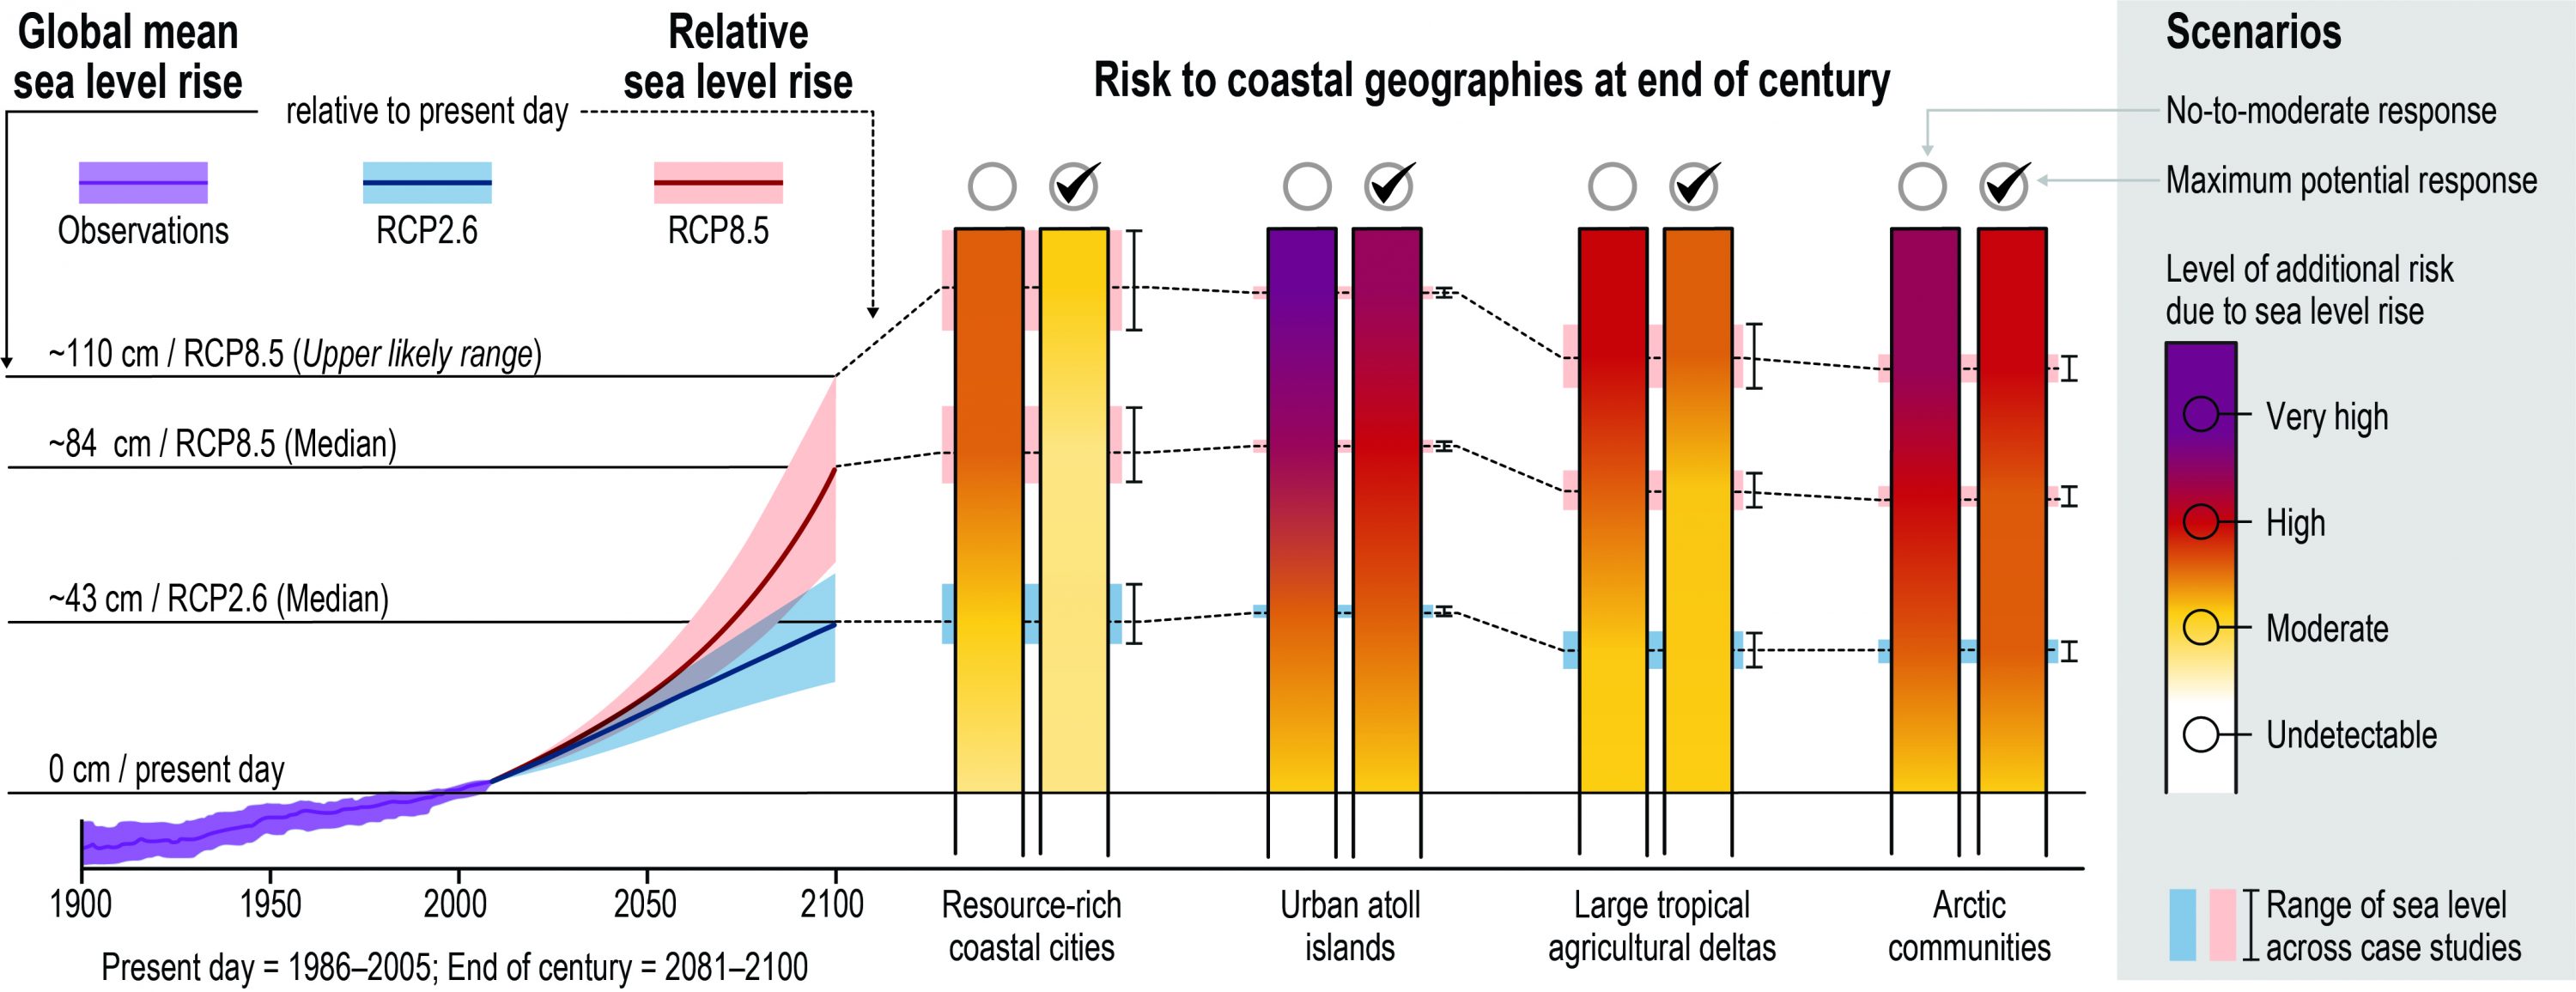 Chapter 4: Sea Level Rise And Implications For Low-lying